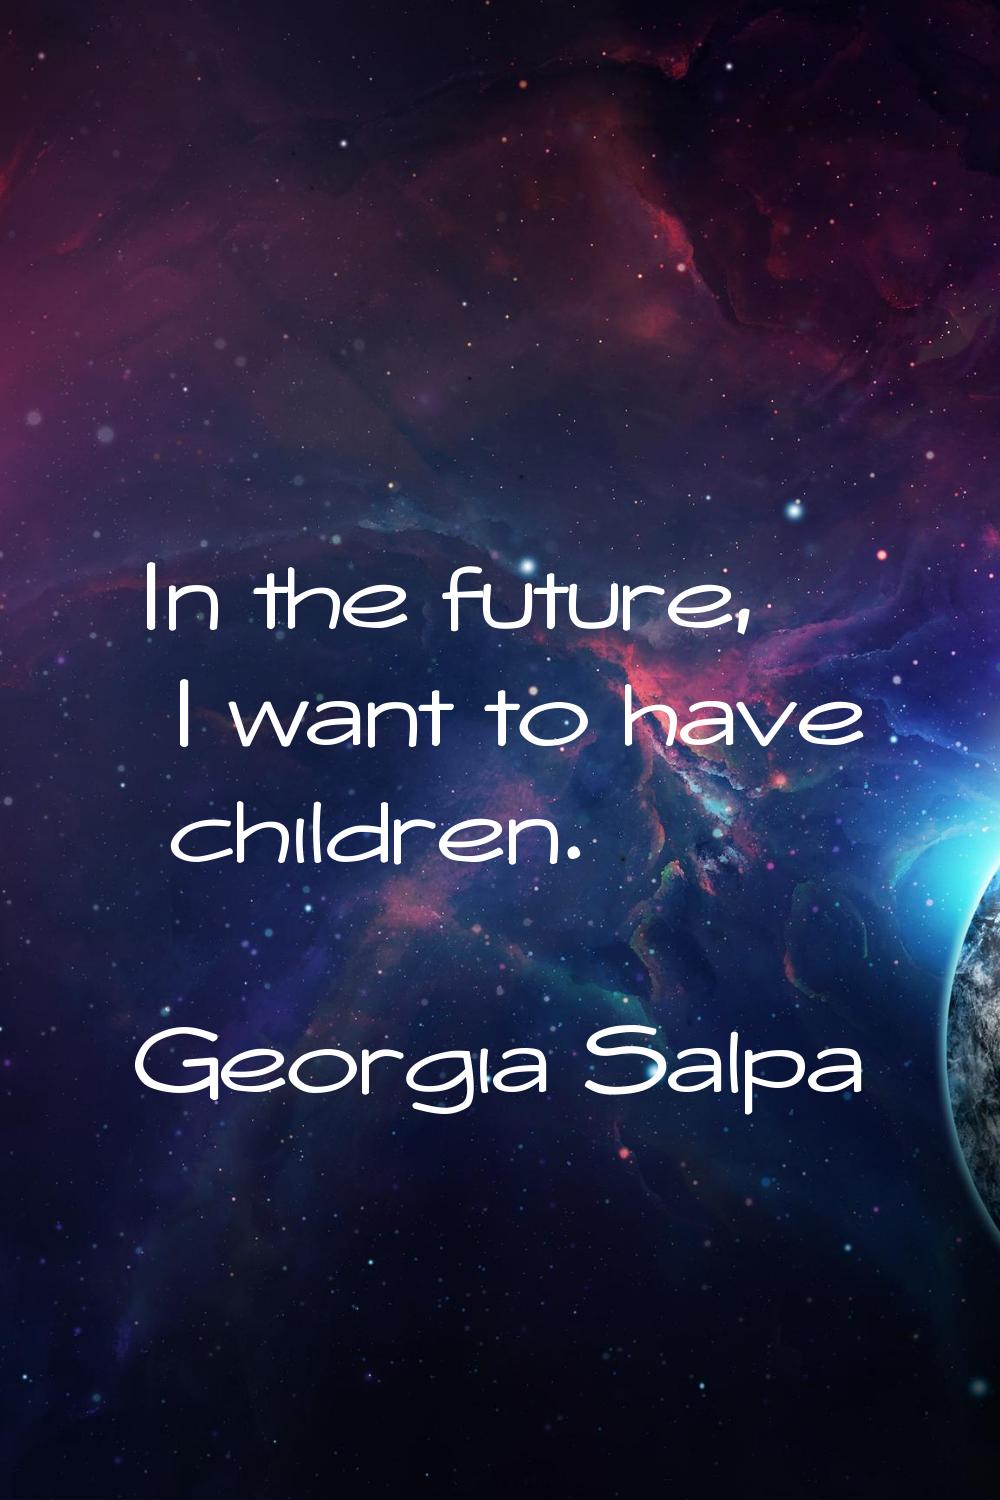 In the future, I want to have children.